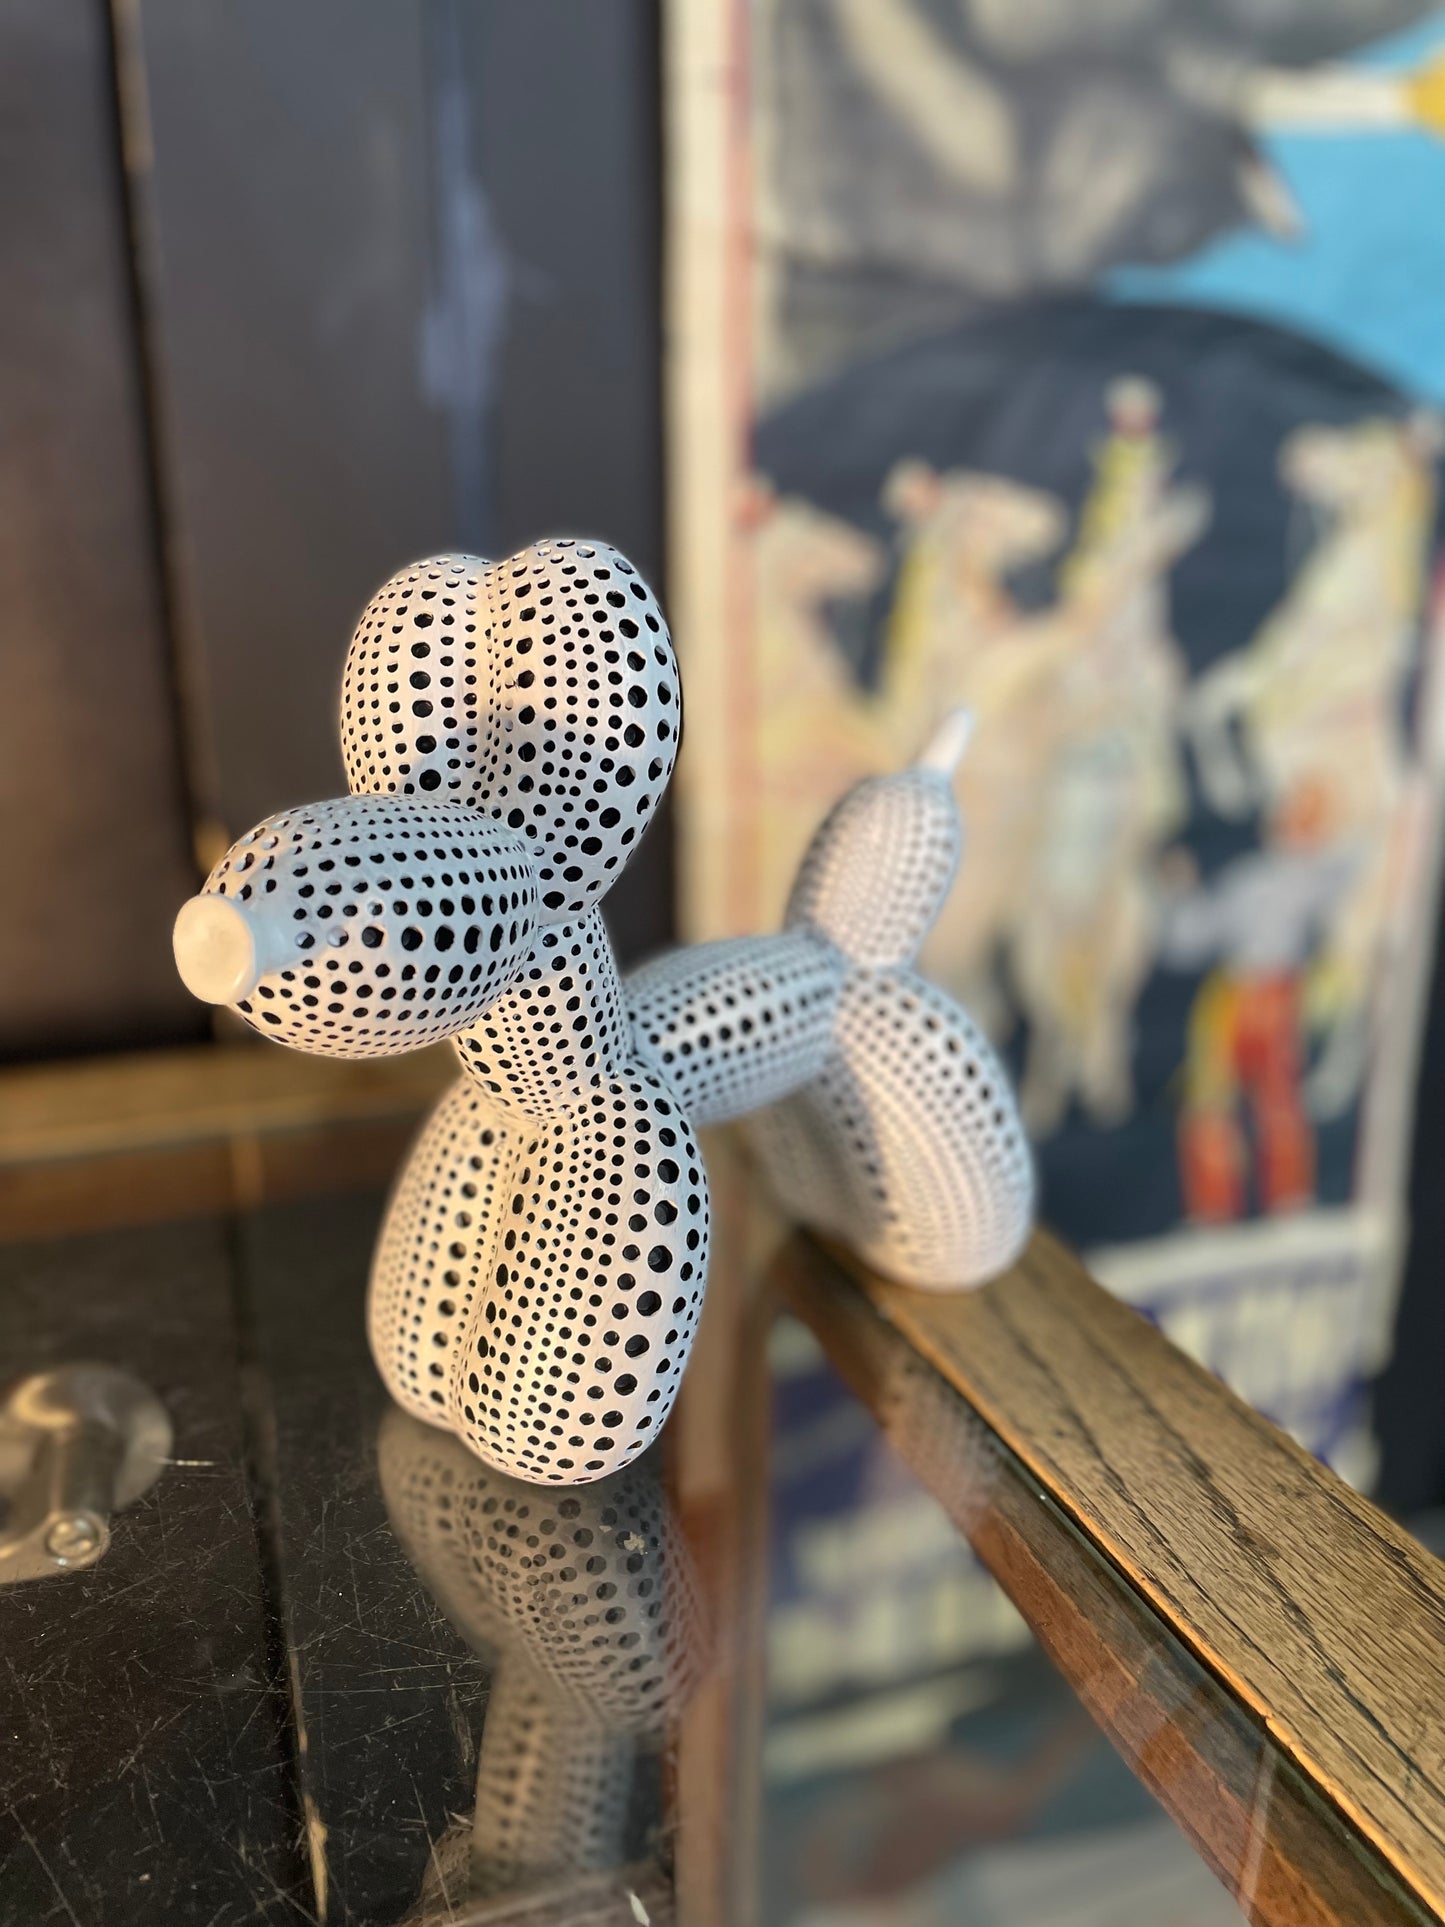 Spotted Balloon Dog Figure